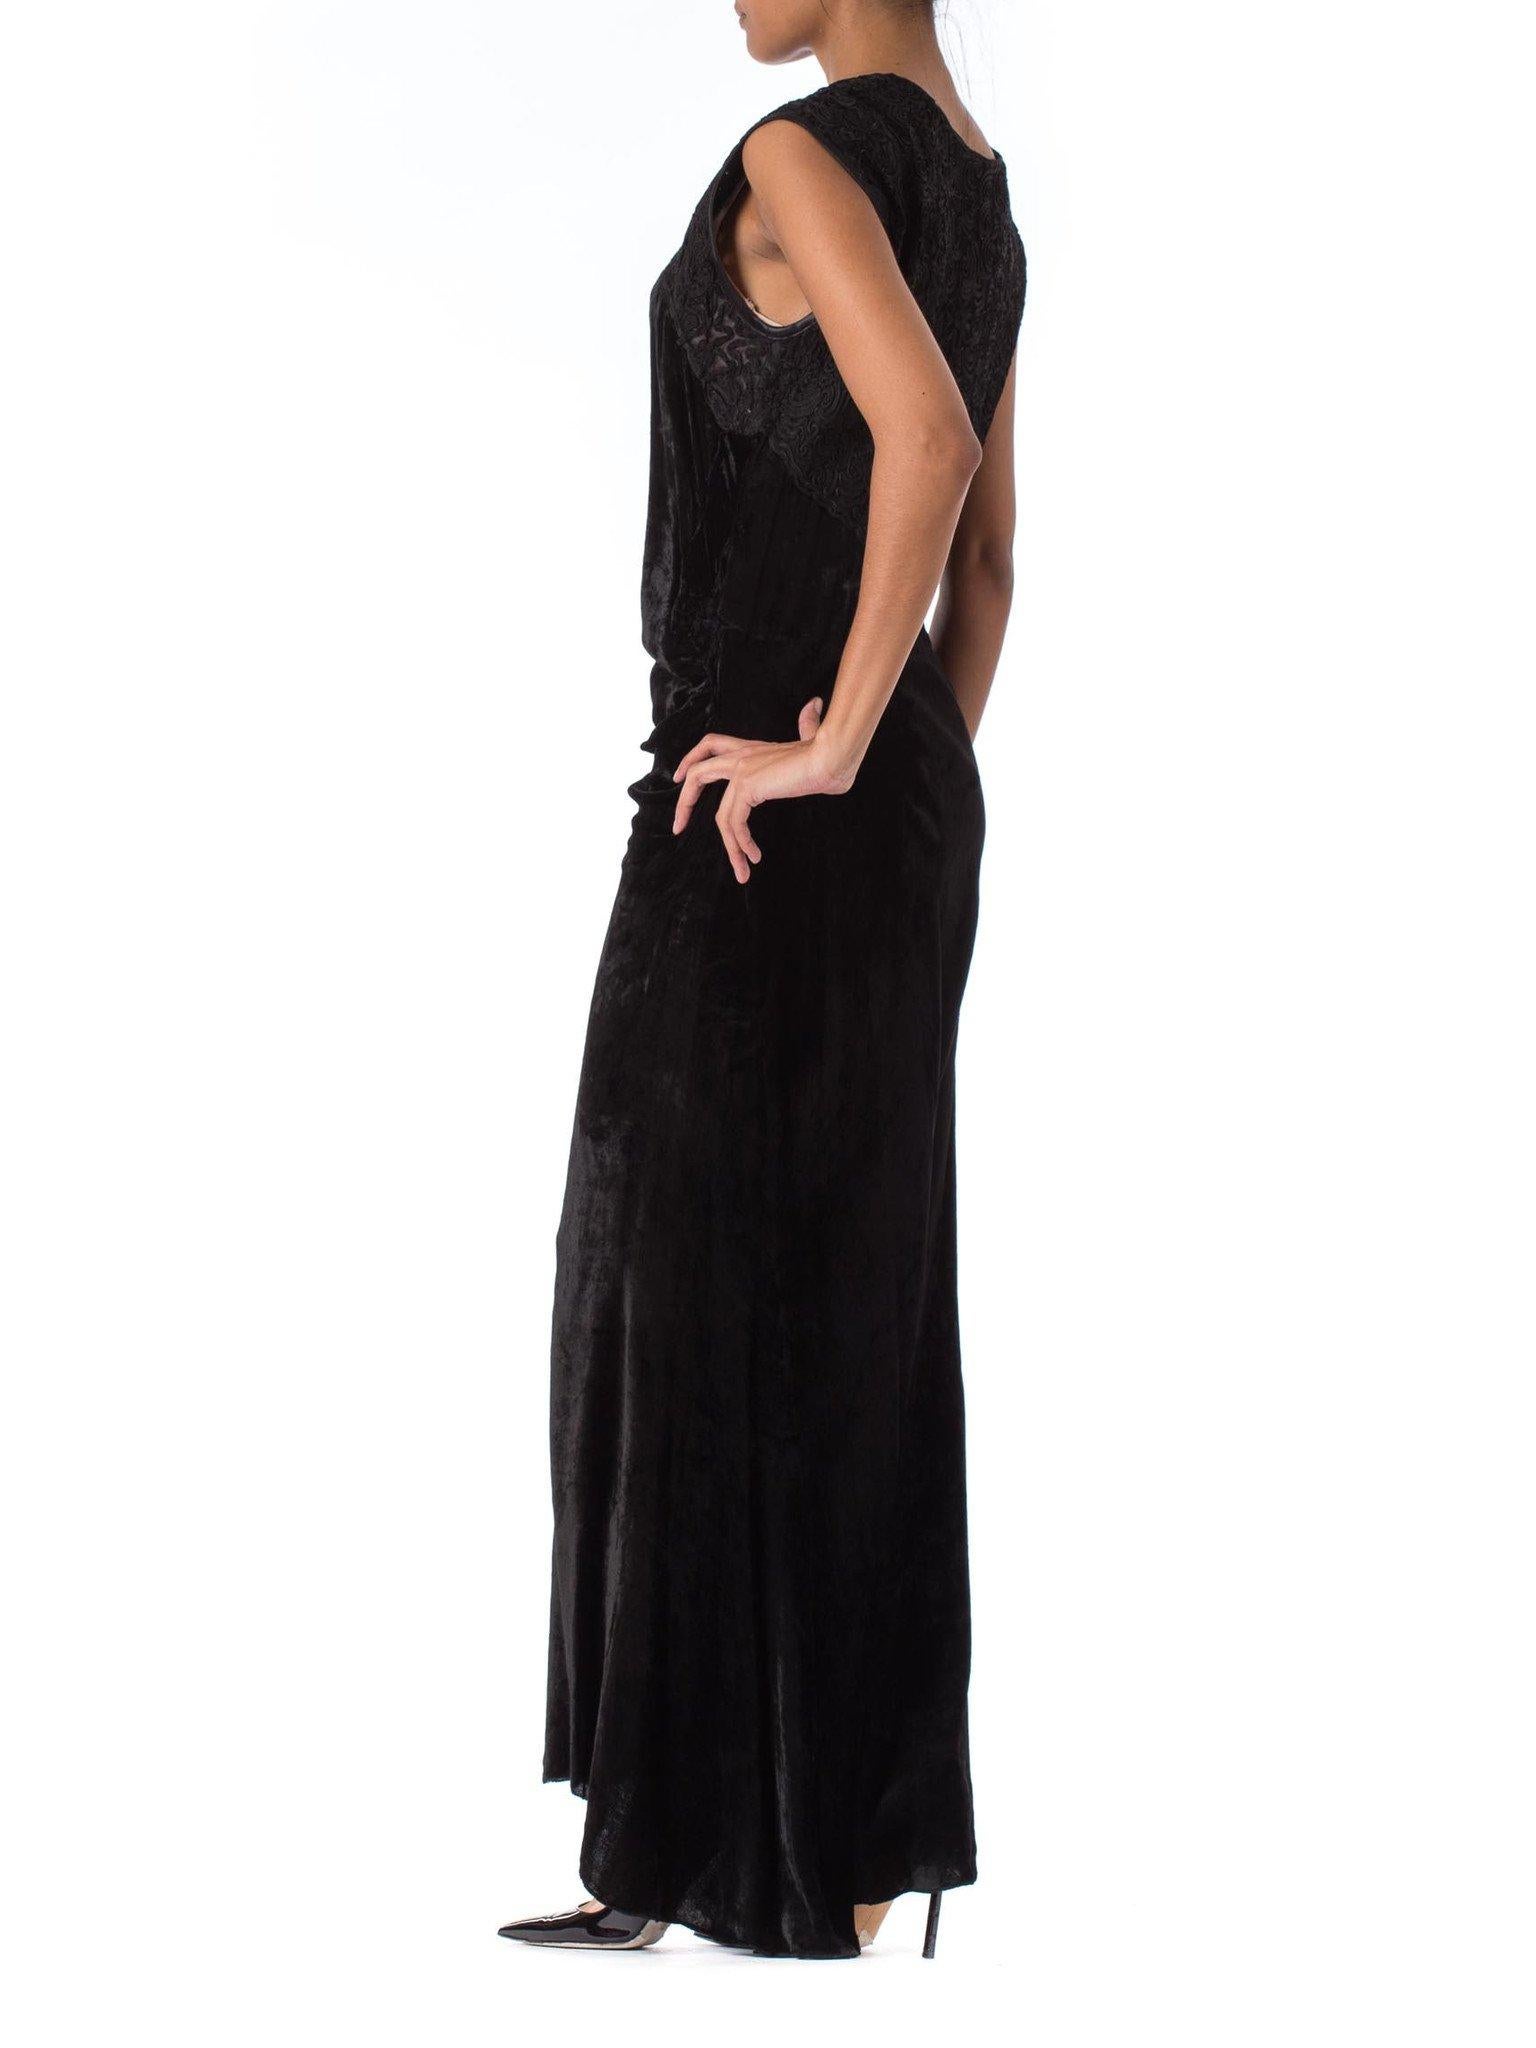 Women's 1930S Black Silk Velvet Bias-Cut Gown With Slight Train & Embroidered Lace Bodi For Sale